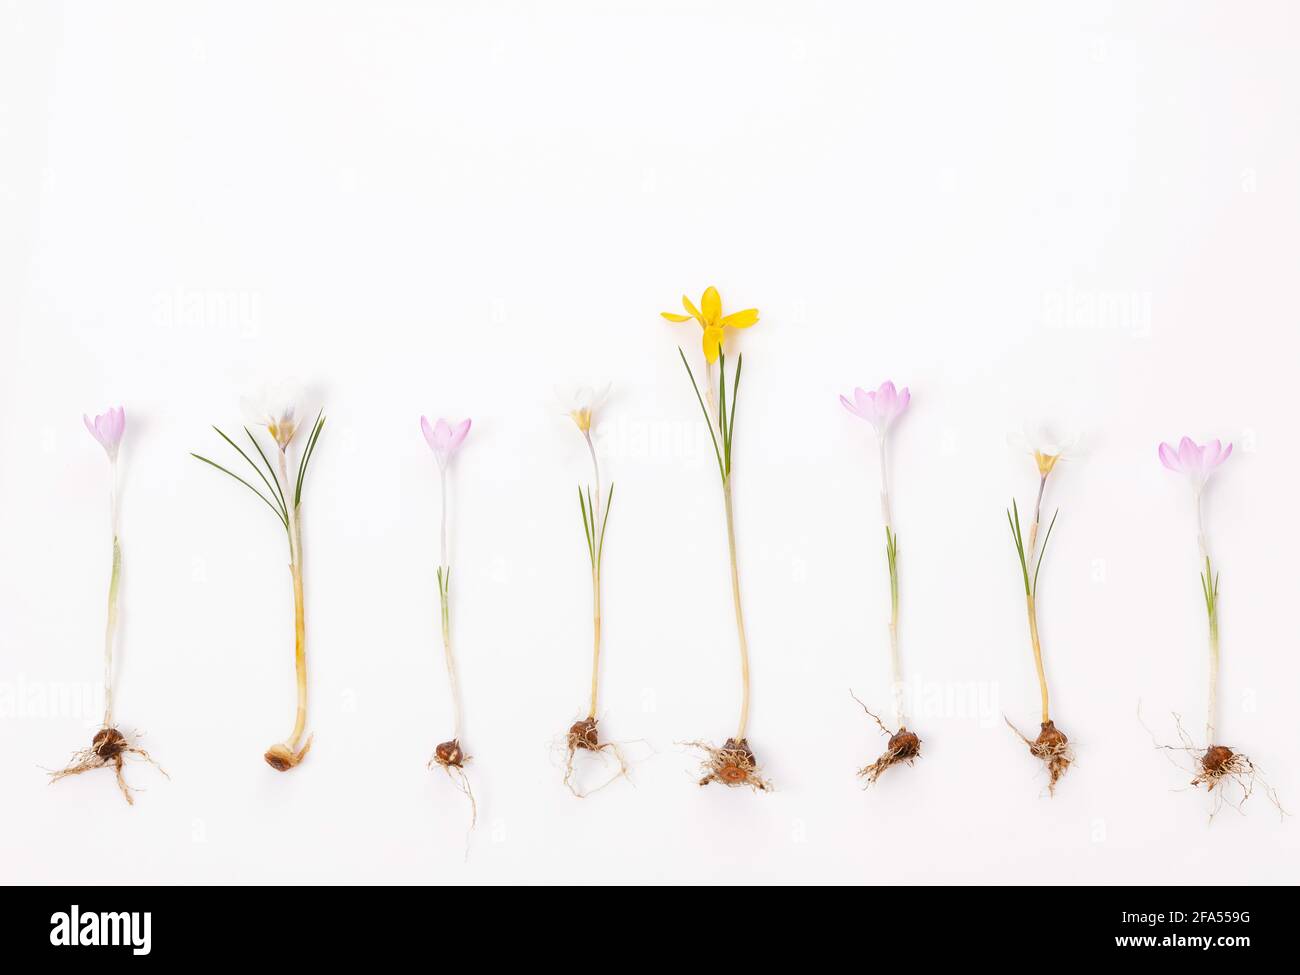 First spring bulbous flowers crocuses on white background. Stock Photo